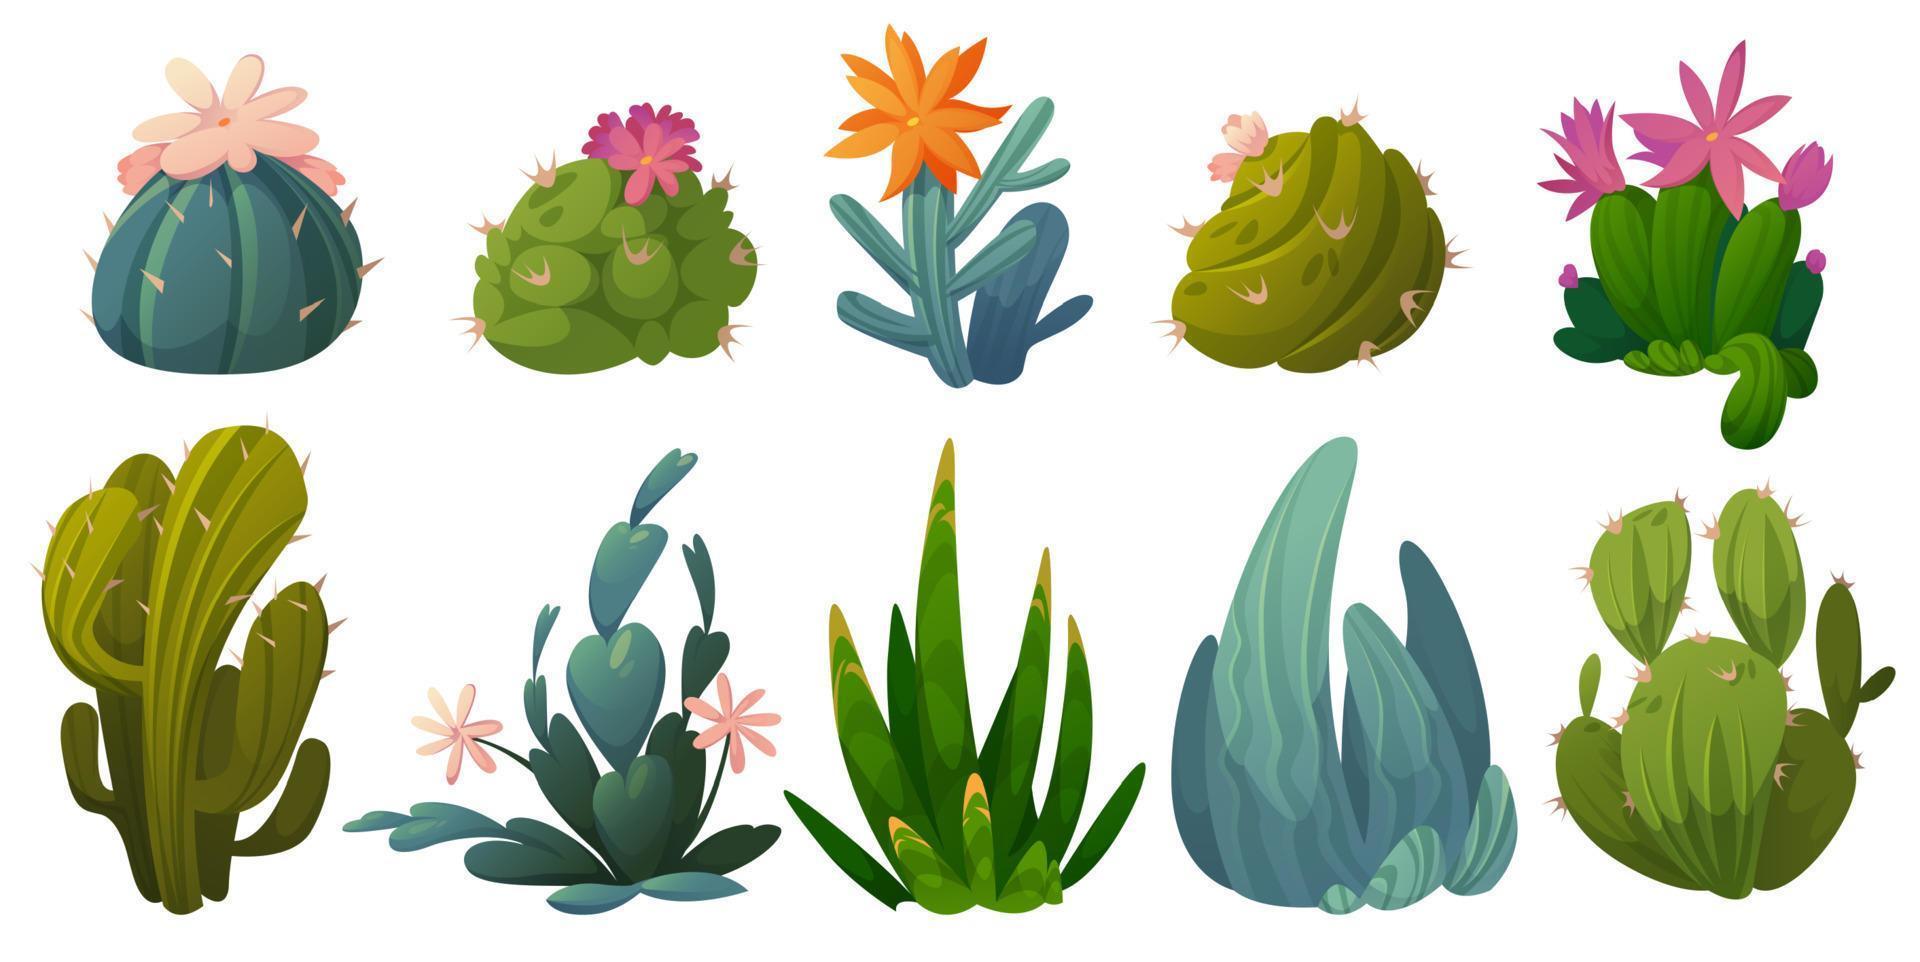 Cute cactuses, succulents and desert plants vector